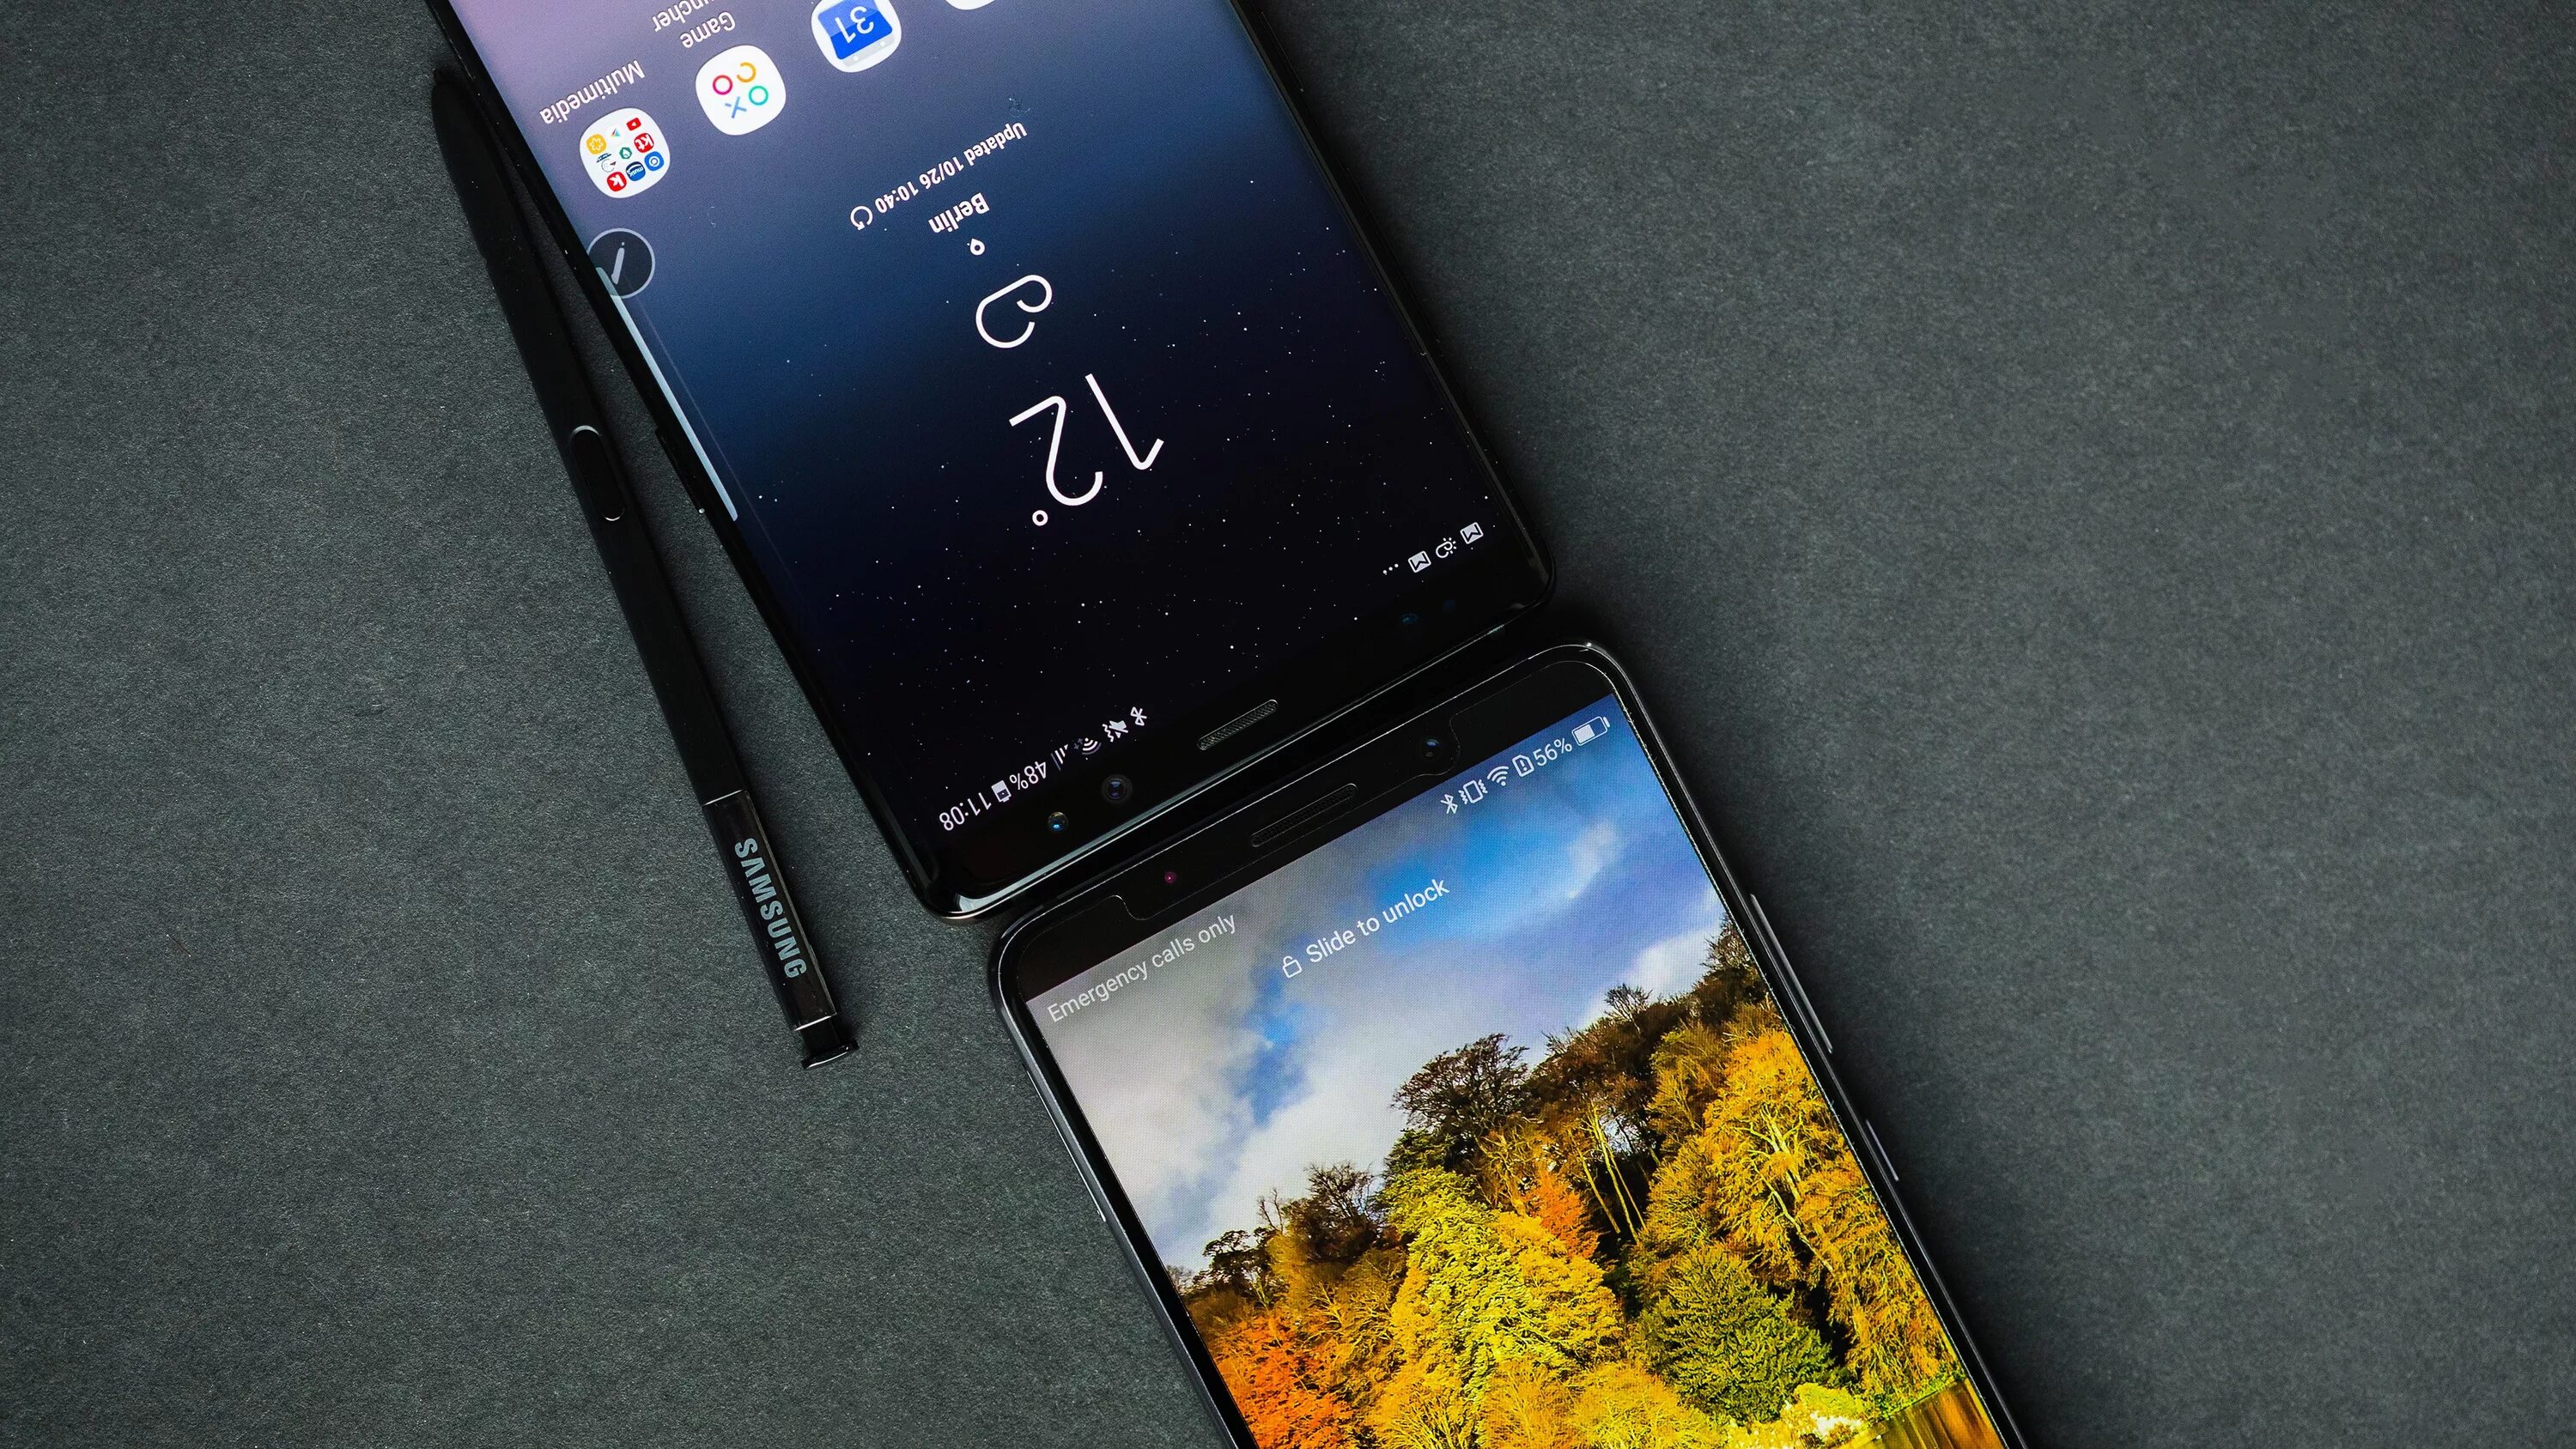 Samsung Note 8 Pro. Samsung Mate 10. Huawei Mate Note 10. Huawei Note 10 Pro.